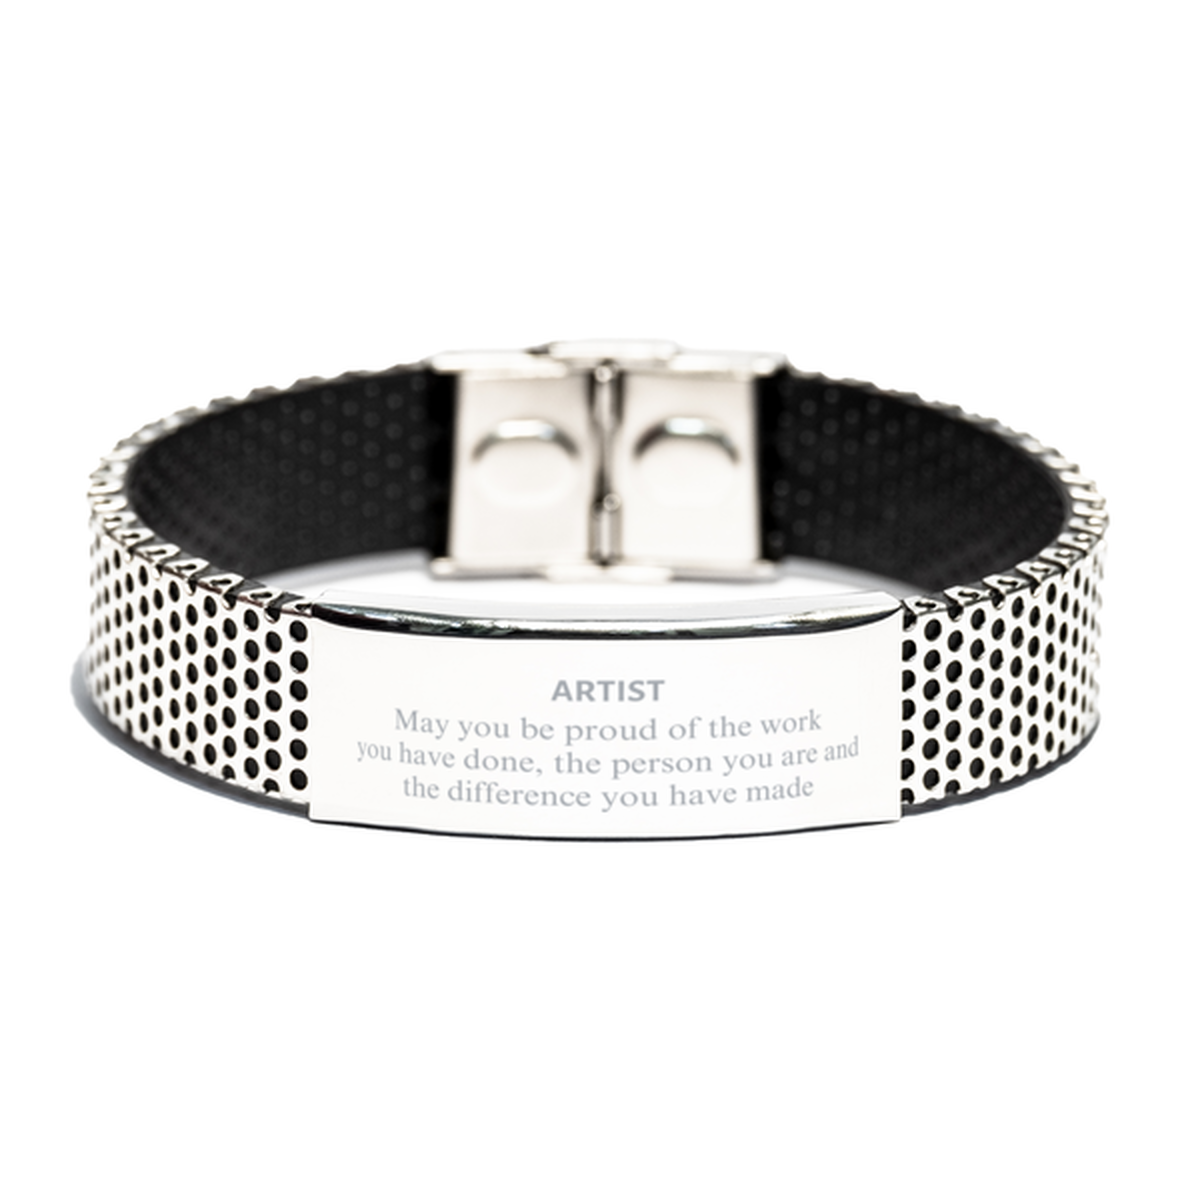 Artist May you be proud of the work you have done, Retirement Artist Stainless Steel Bracelet for Colleague Appreciation Gifts Amazing for Artist